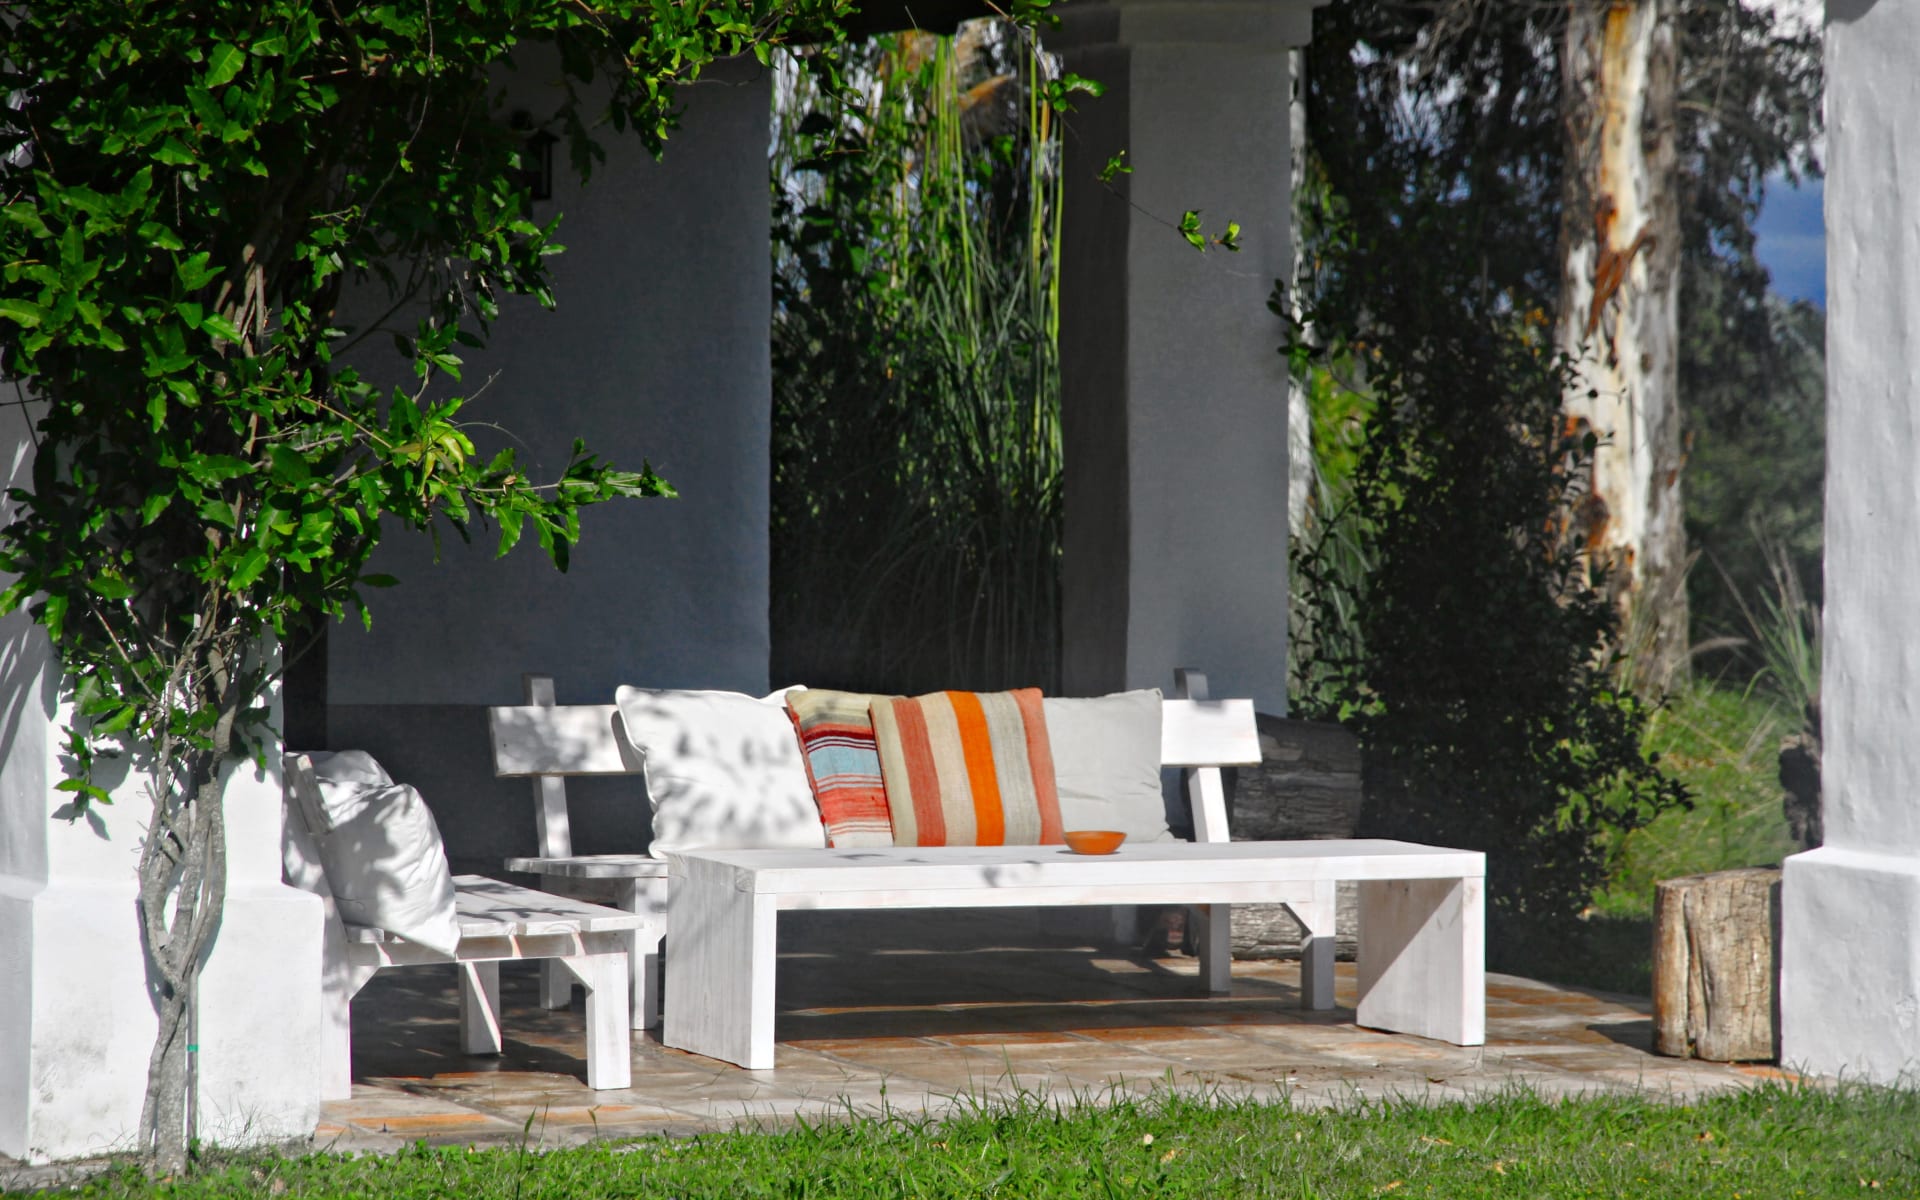 Trees surround a white bench with orange stripped cushions and a white table overlooking a green lawn. 